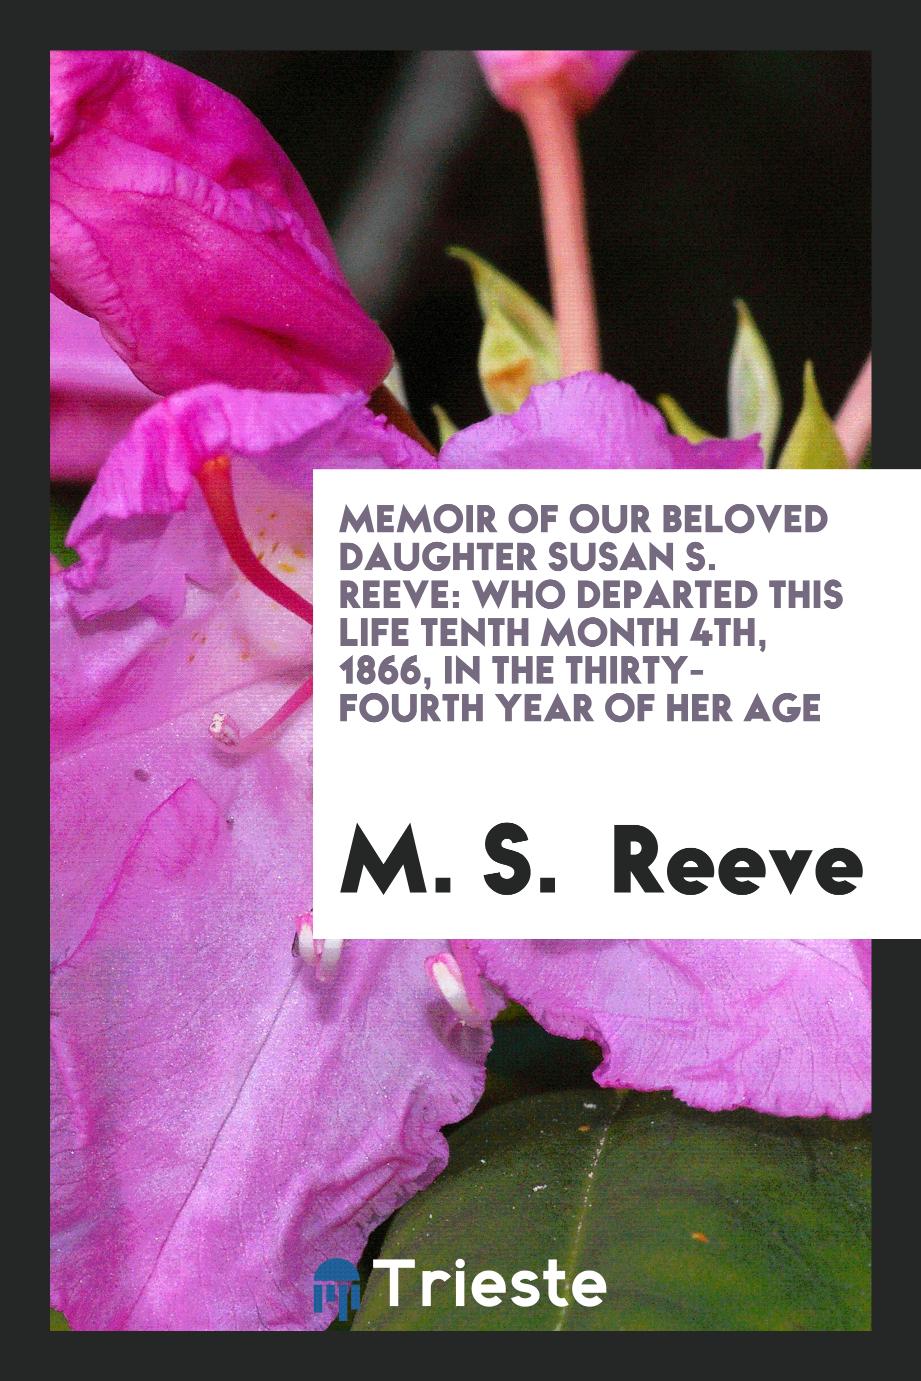 Memoir of Our Beloved Daughter Susan S. Reeve: Who Departed This Life Tenth Month 4th, 1866, in the Thirty-Fourth Year of Her Age